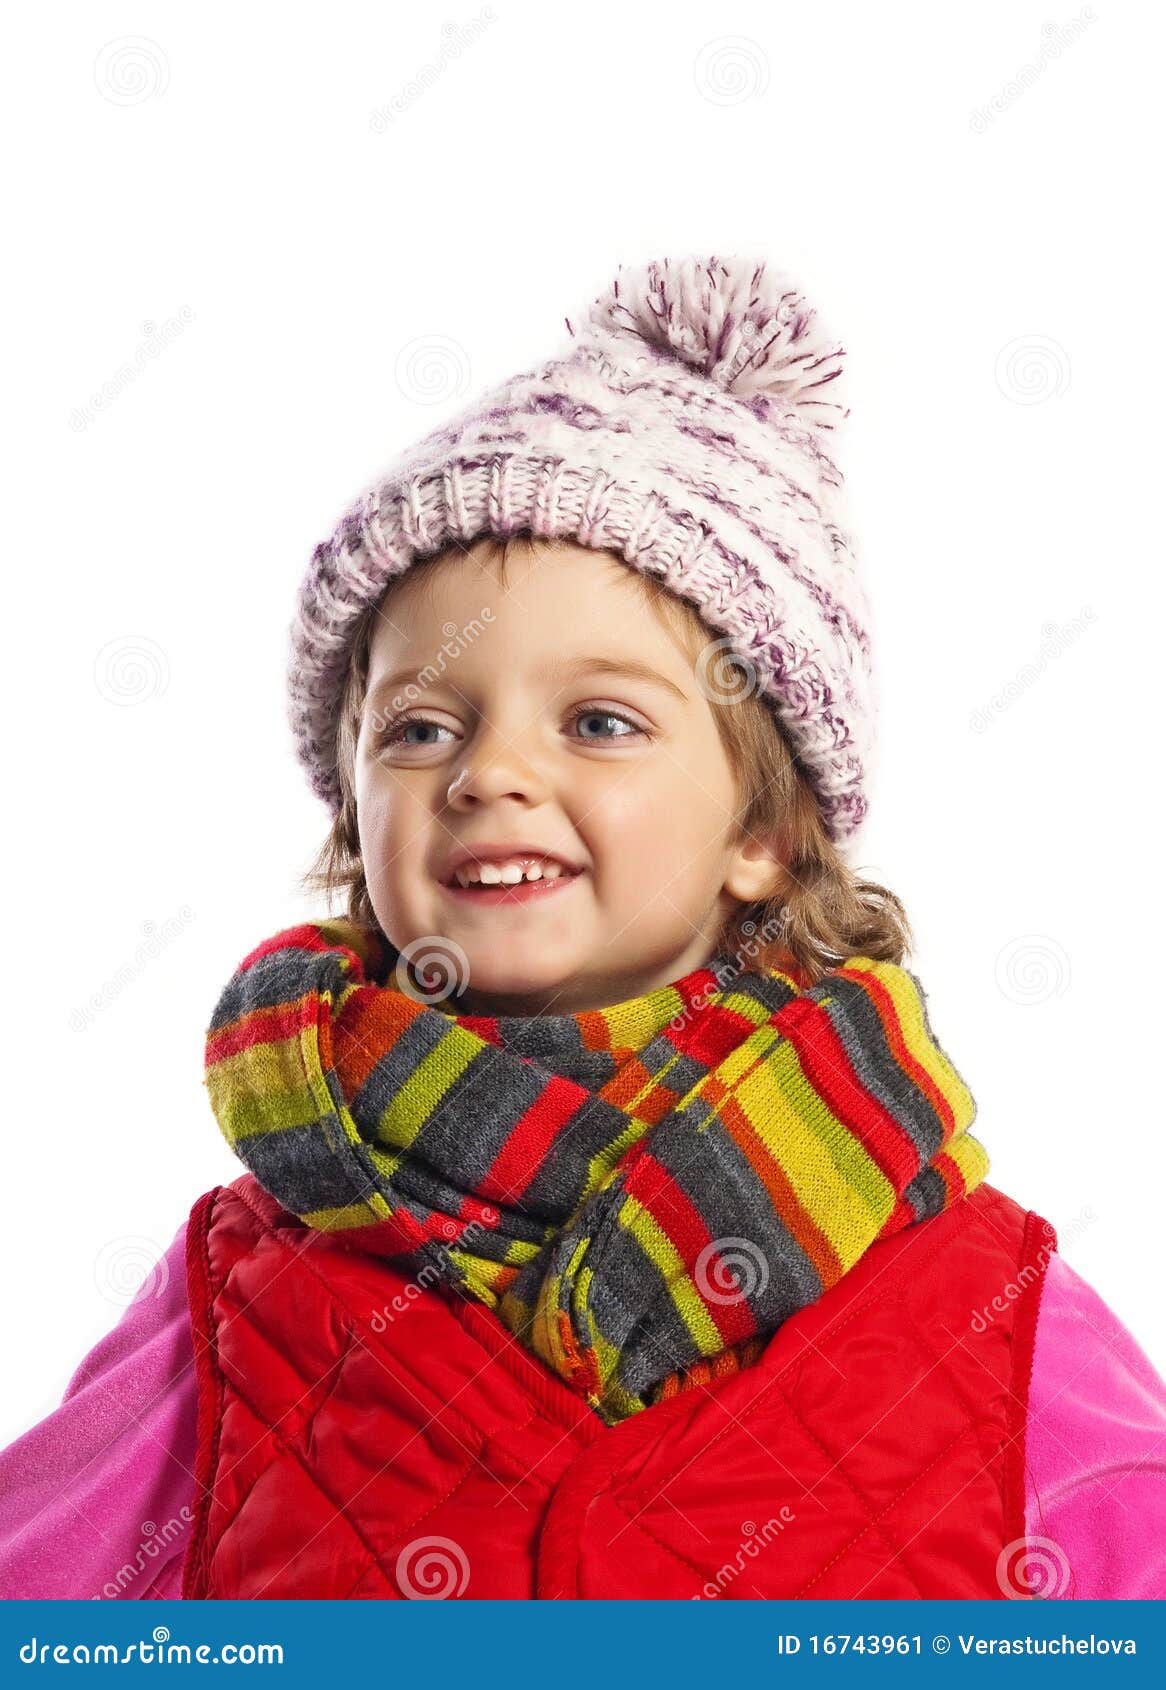 Little Girl Wearing Winter Clothes Stock Image - Image of laughing ...